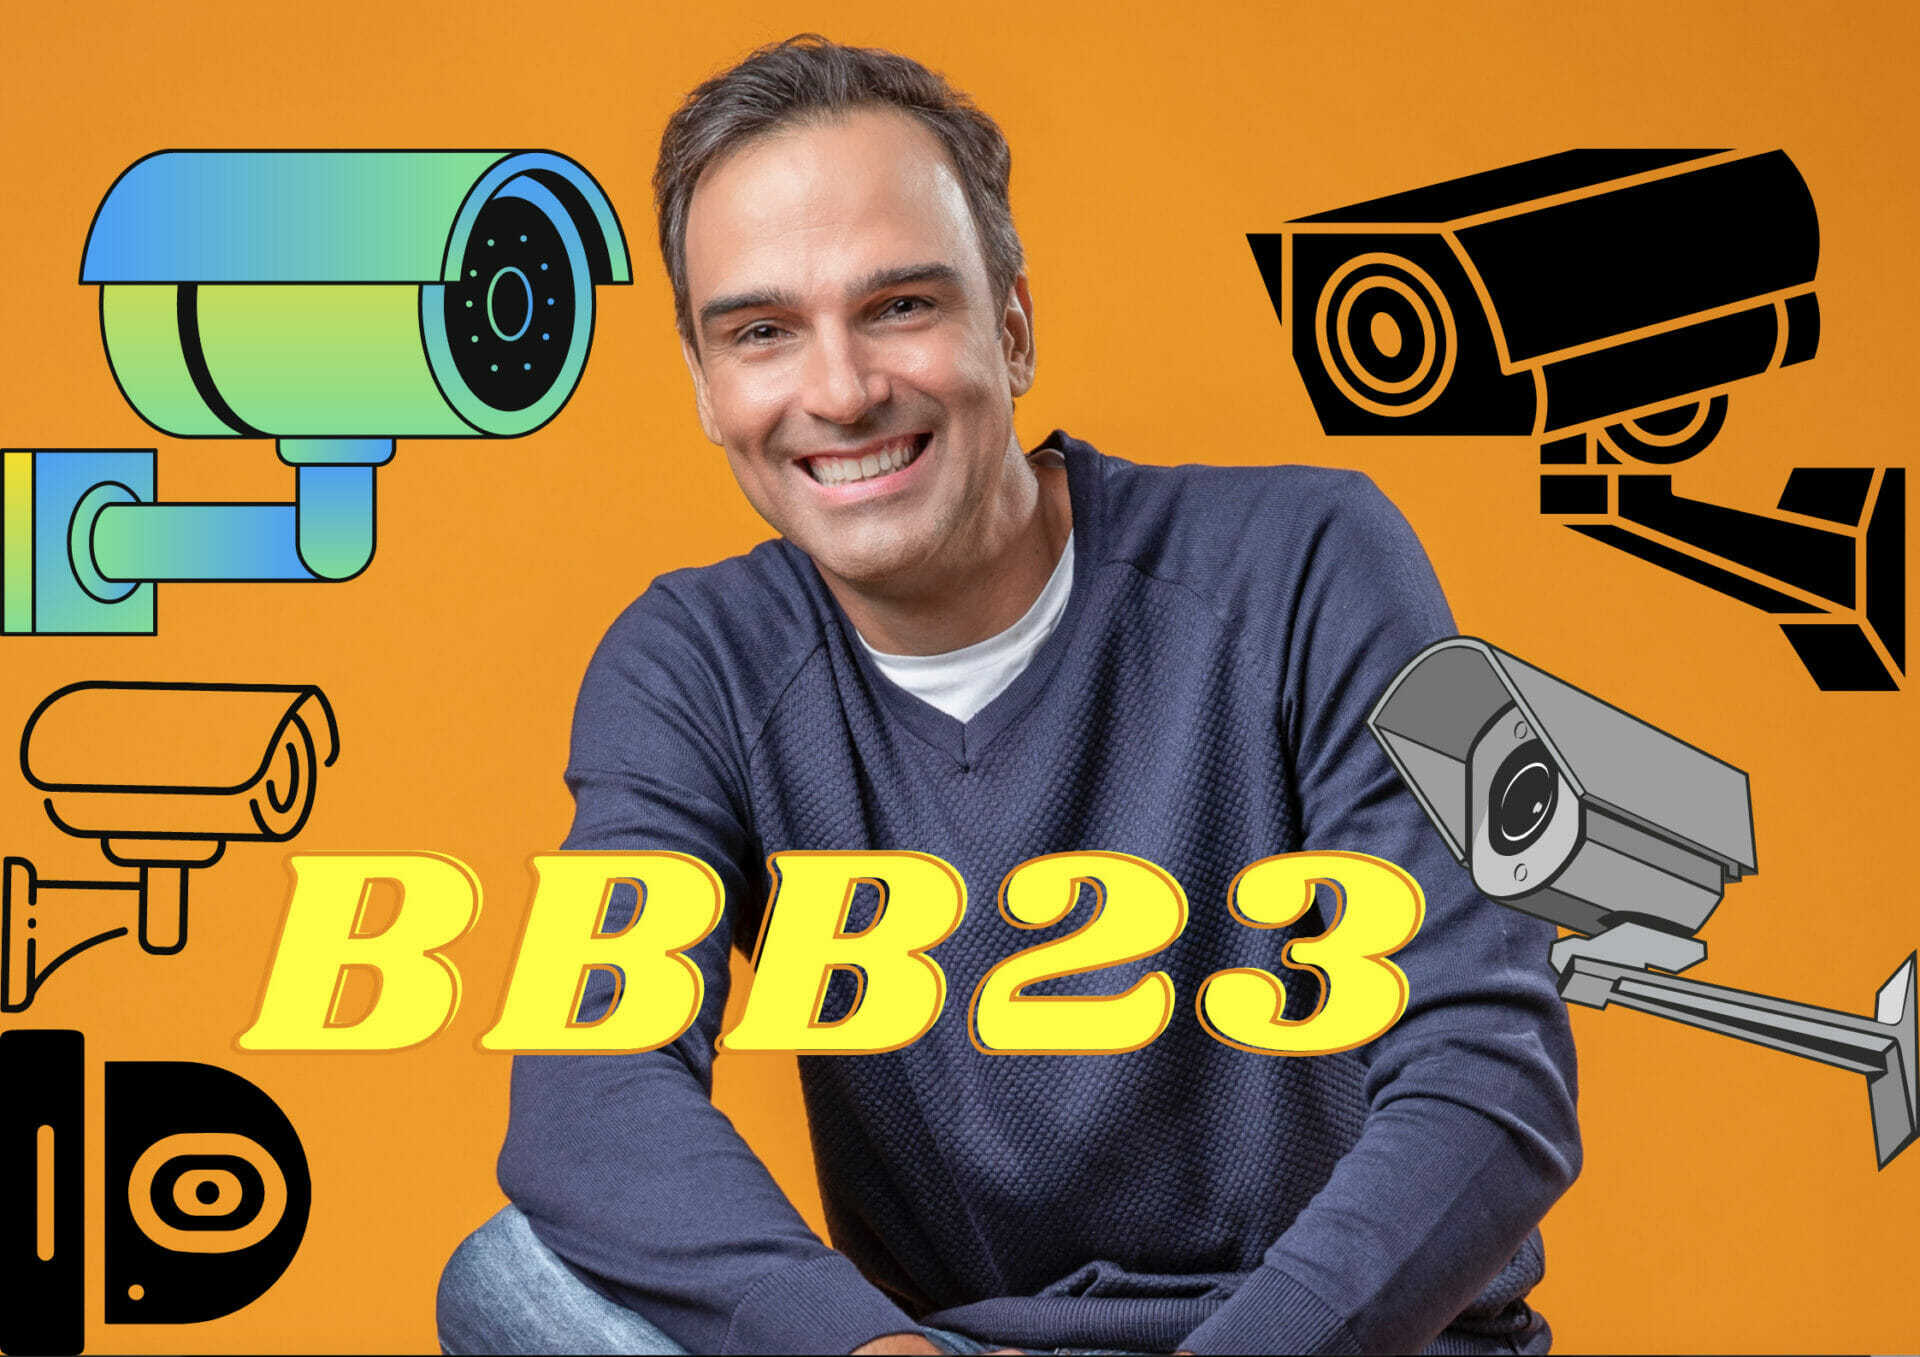 Find out which celebrities have been quoted from BBB 23 Cabin